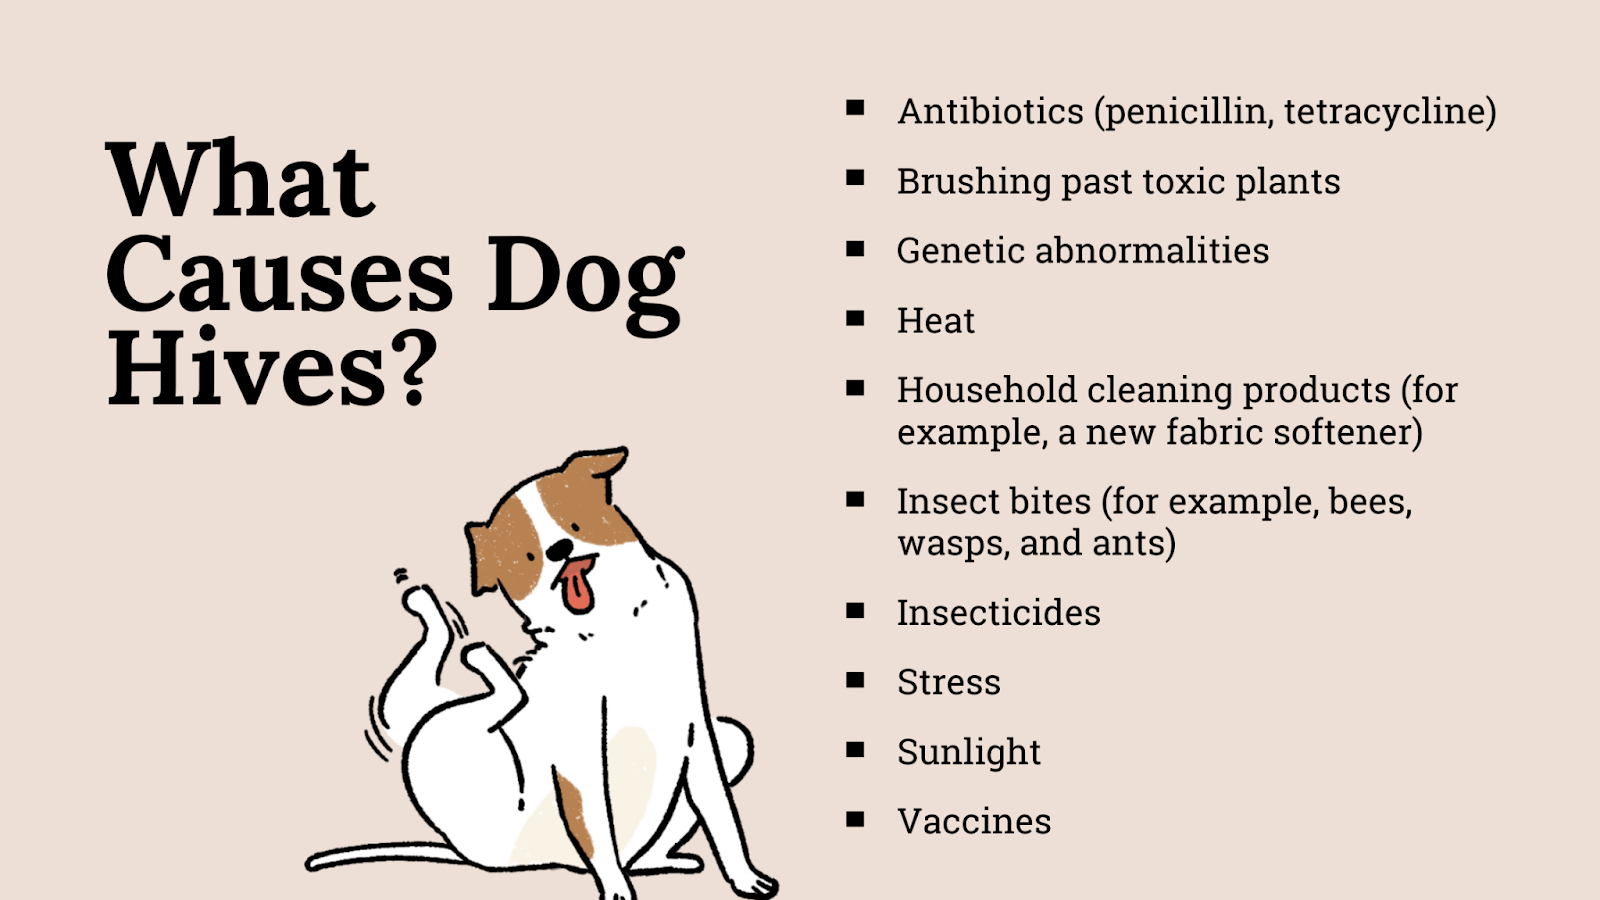 What causes dog hives?